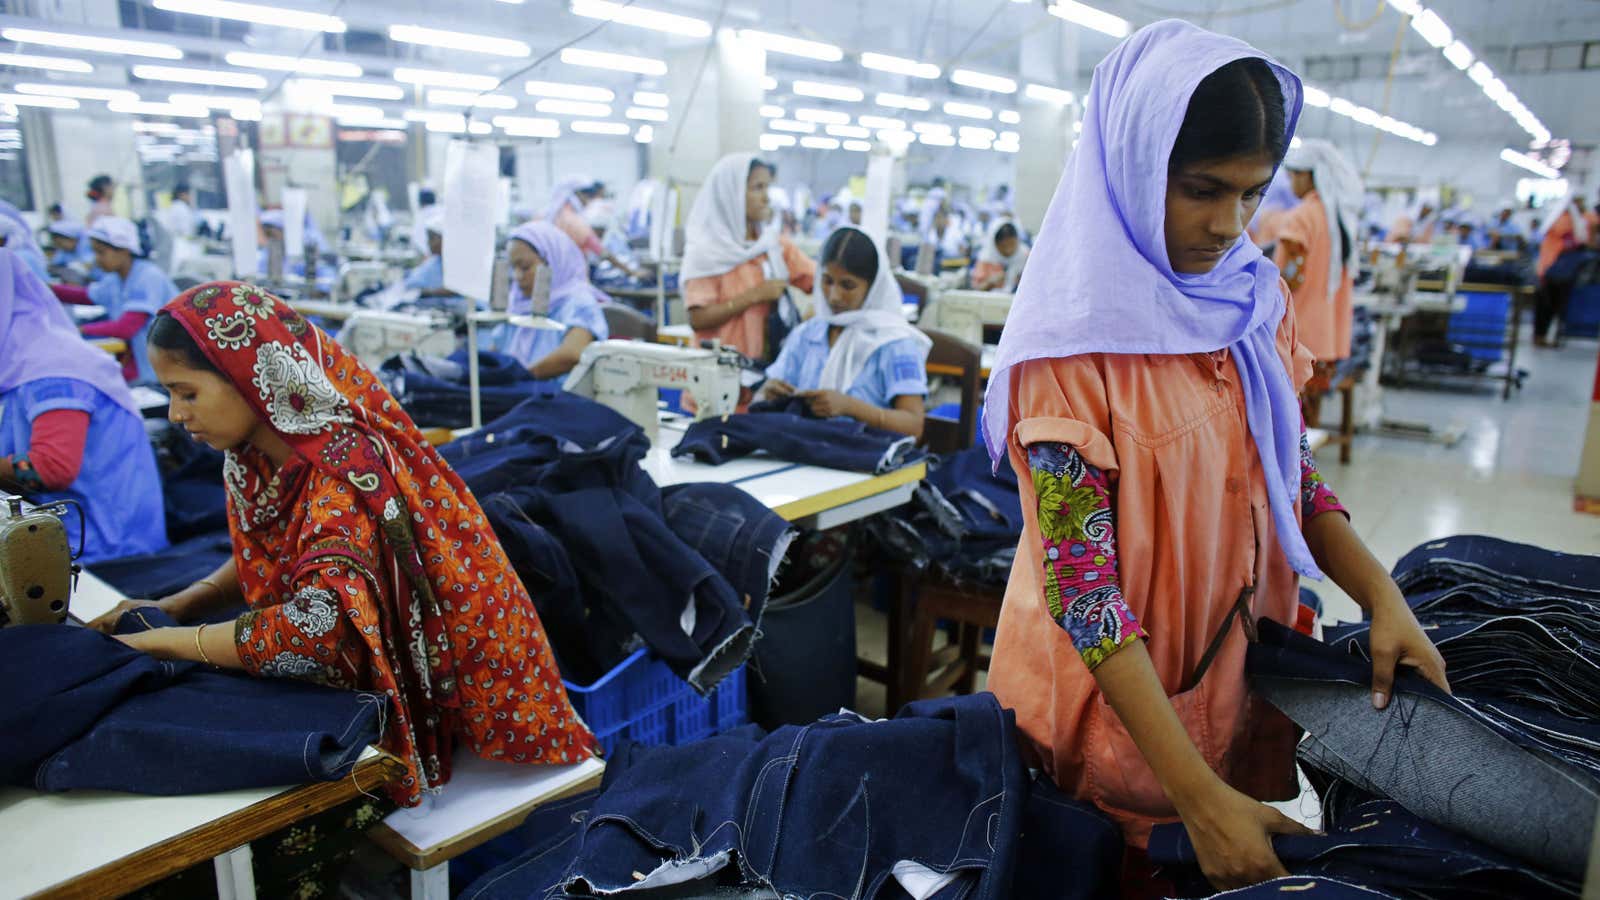 A growing share of the world’s clothing comes from factories like this one in Bangladesh.